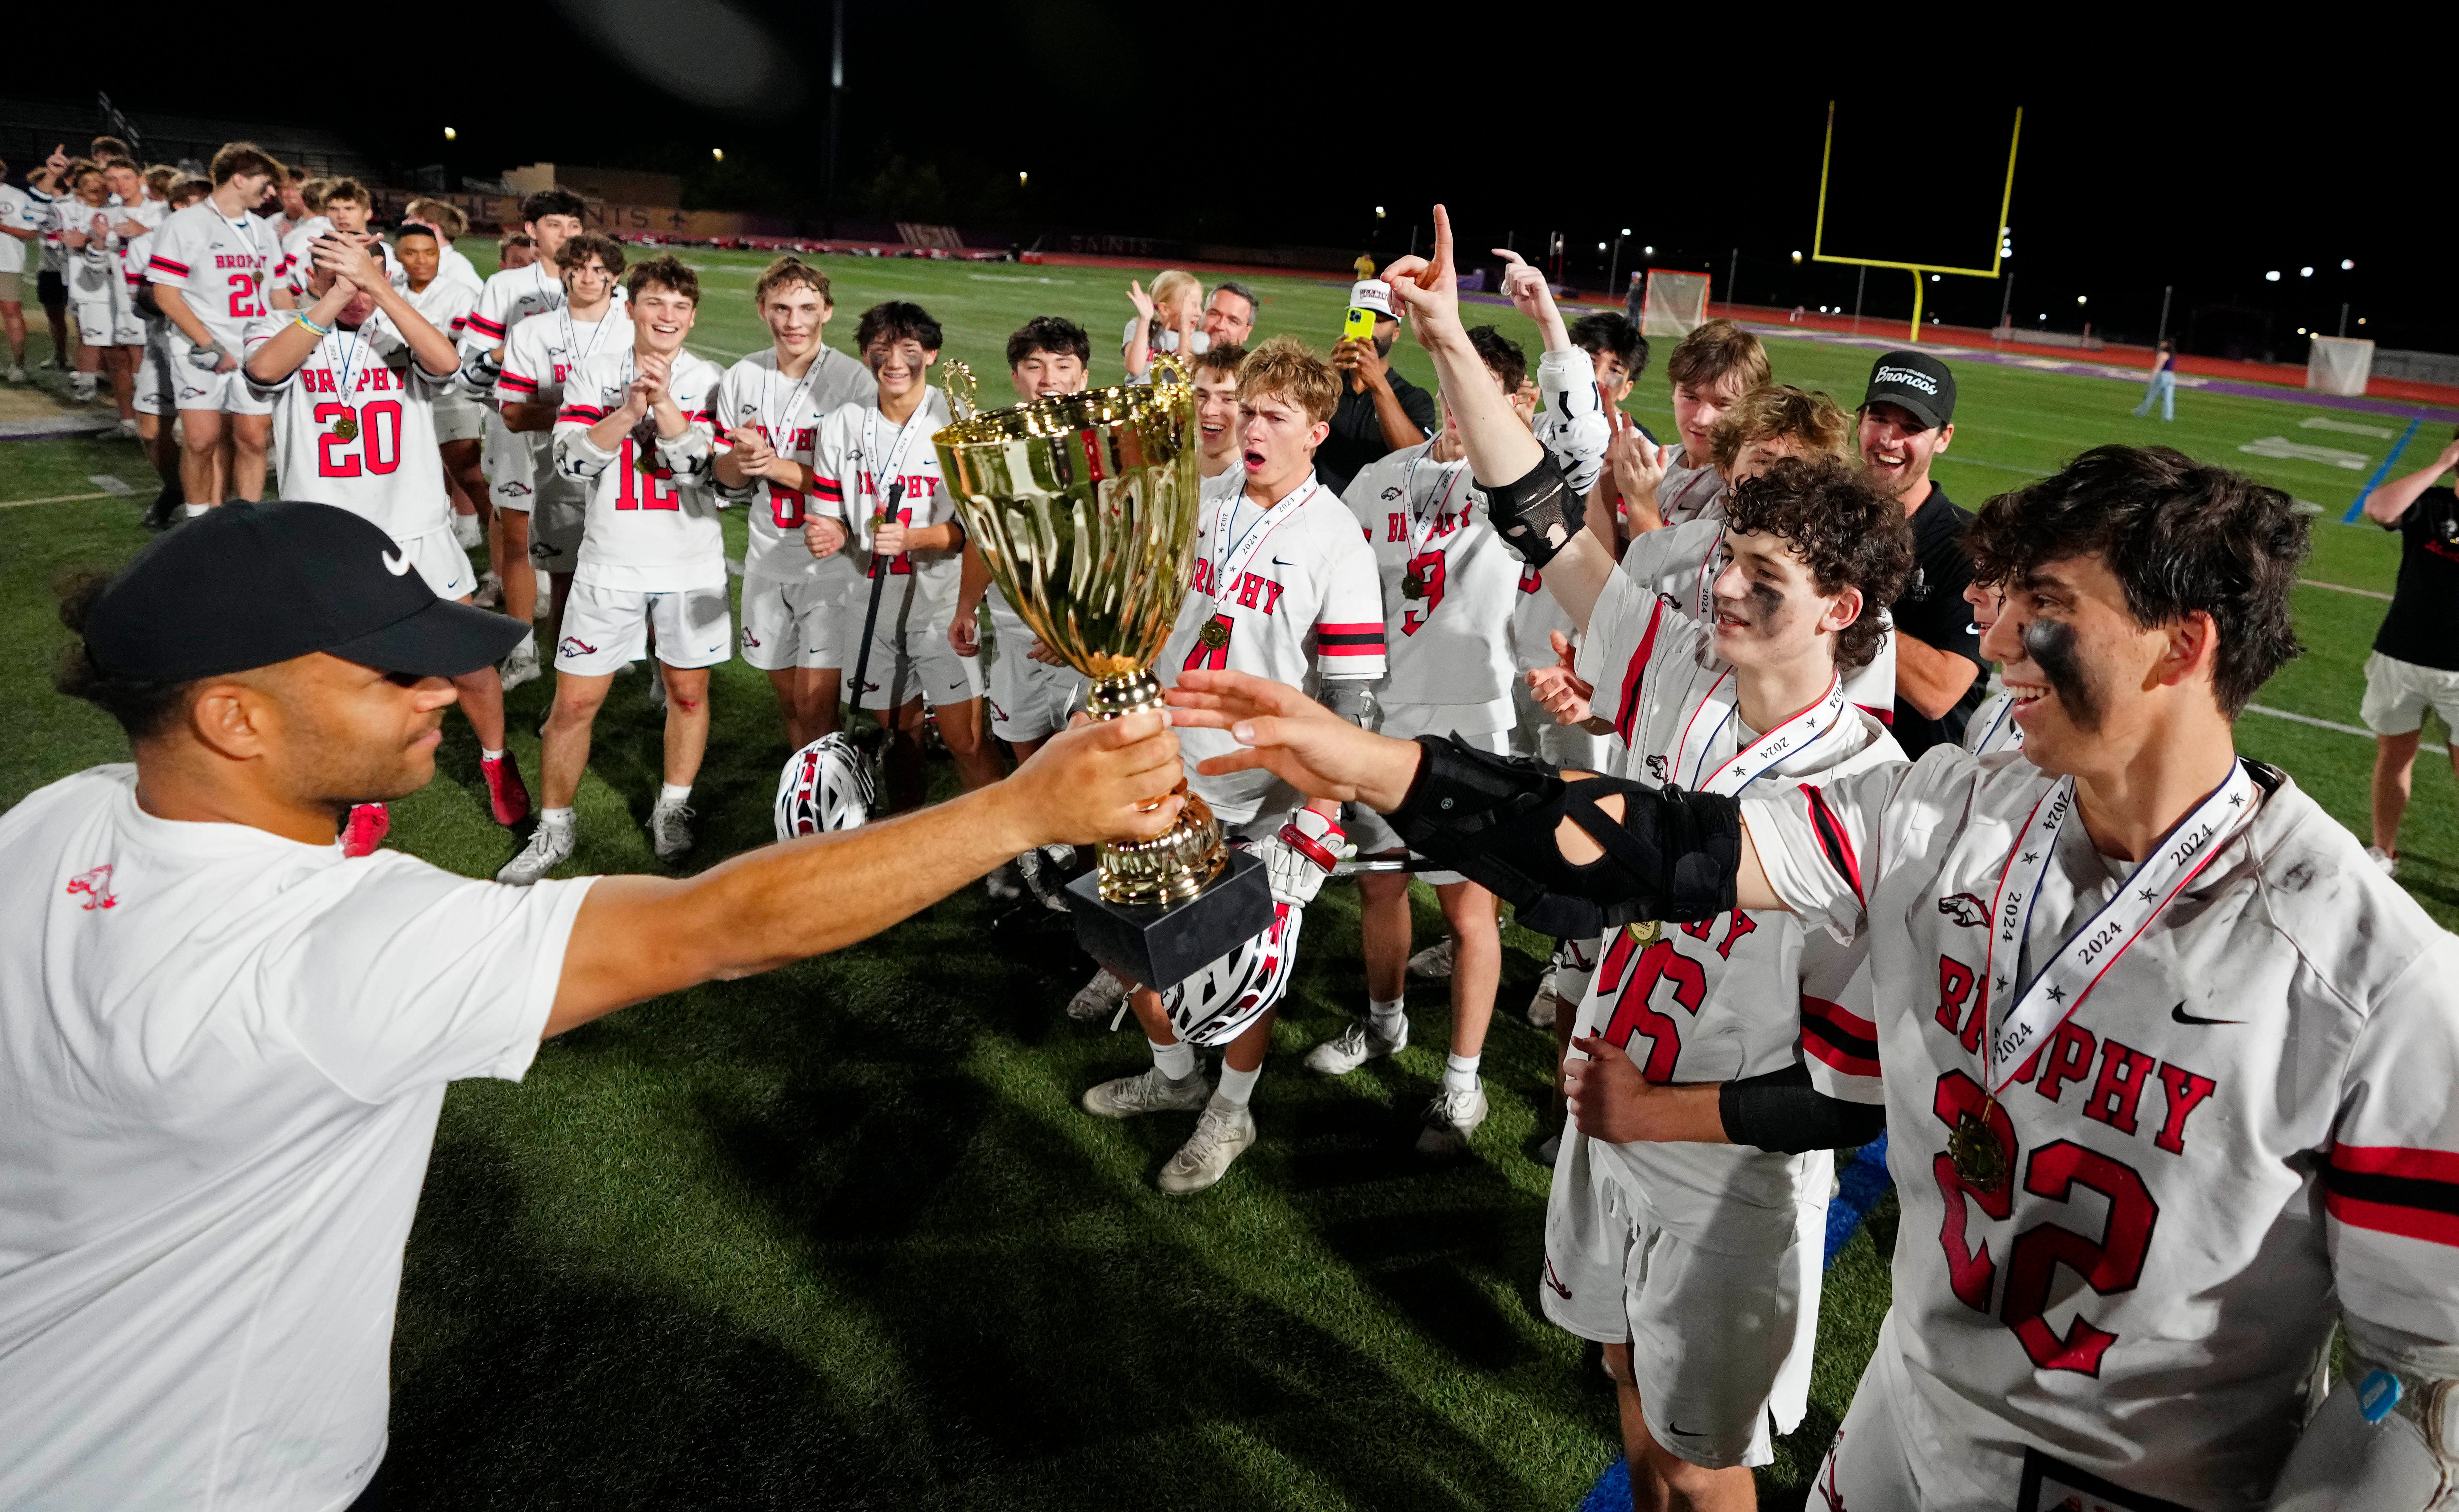 Brophy Prep boys lacrosse dynasty rolling with 3rd straight state title